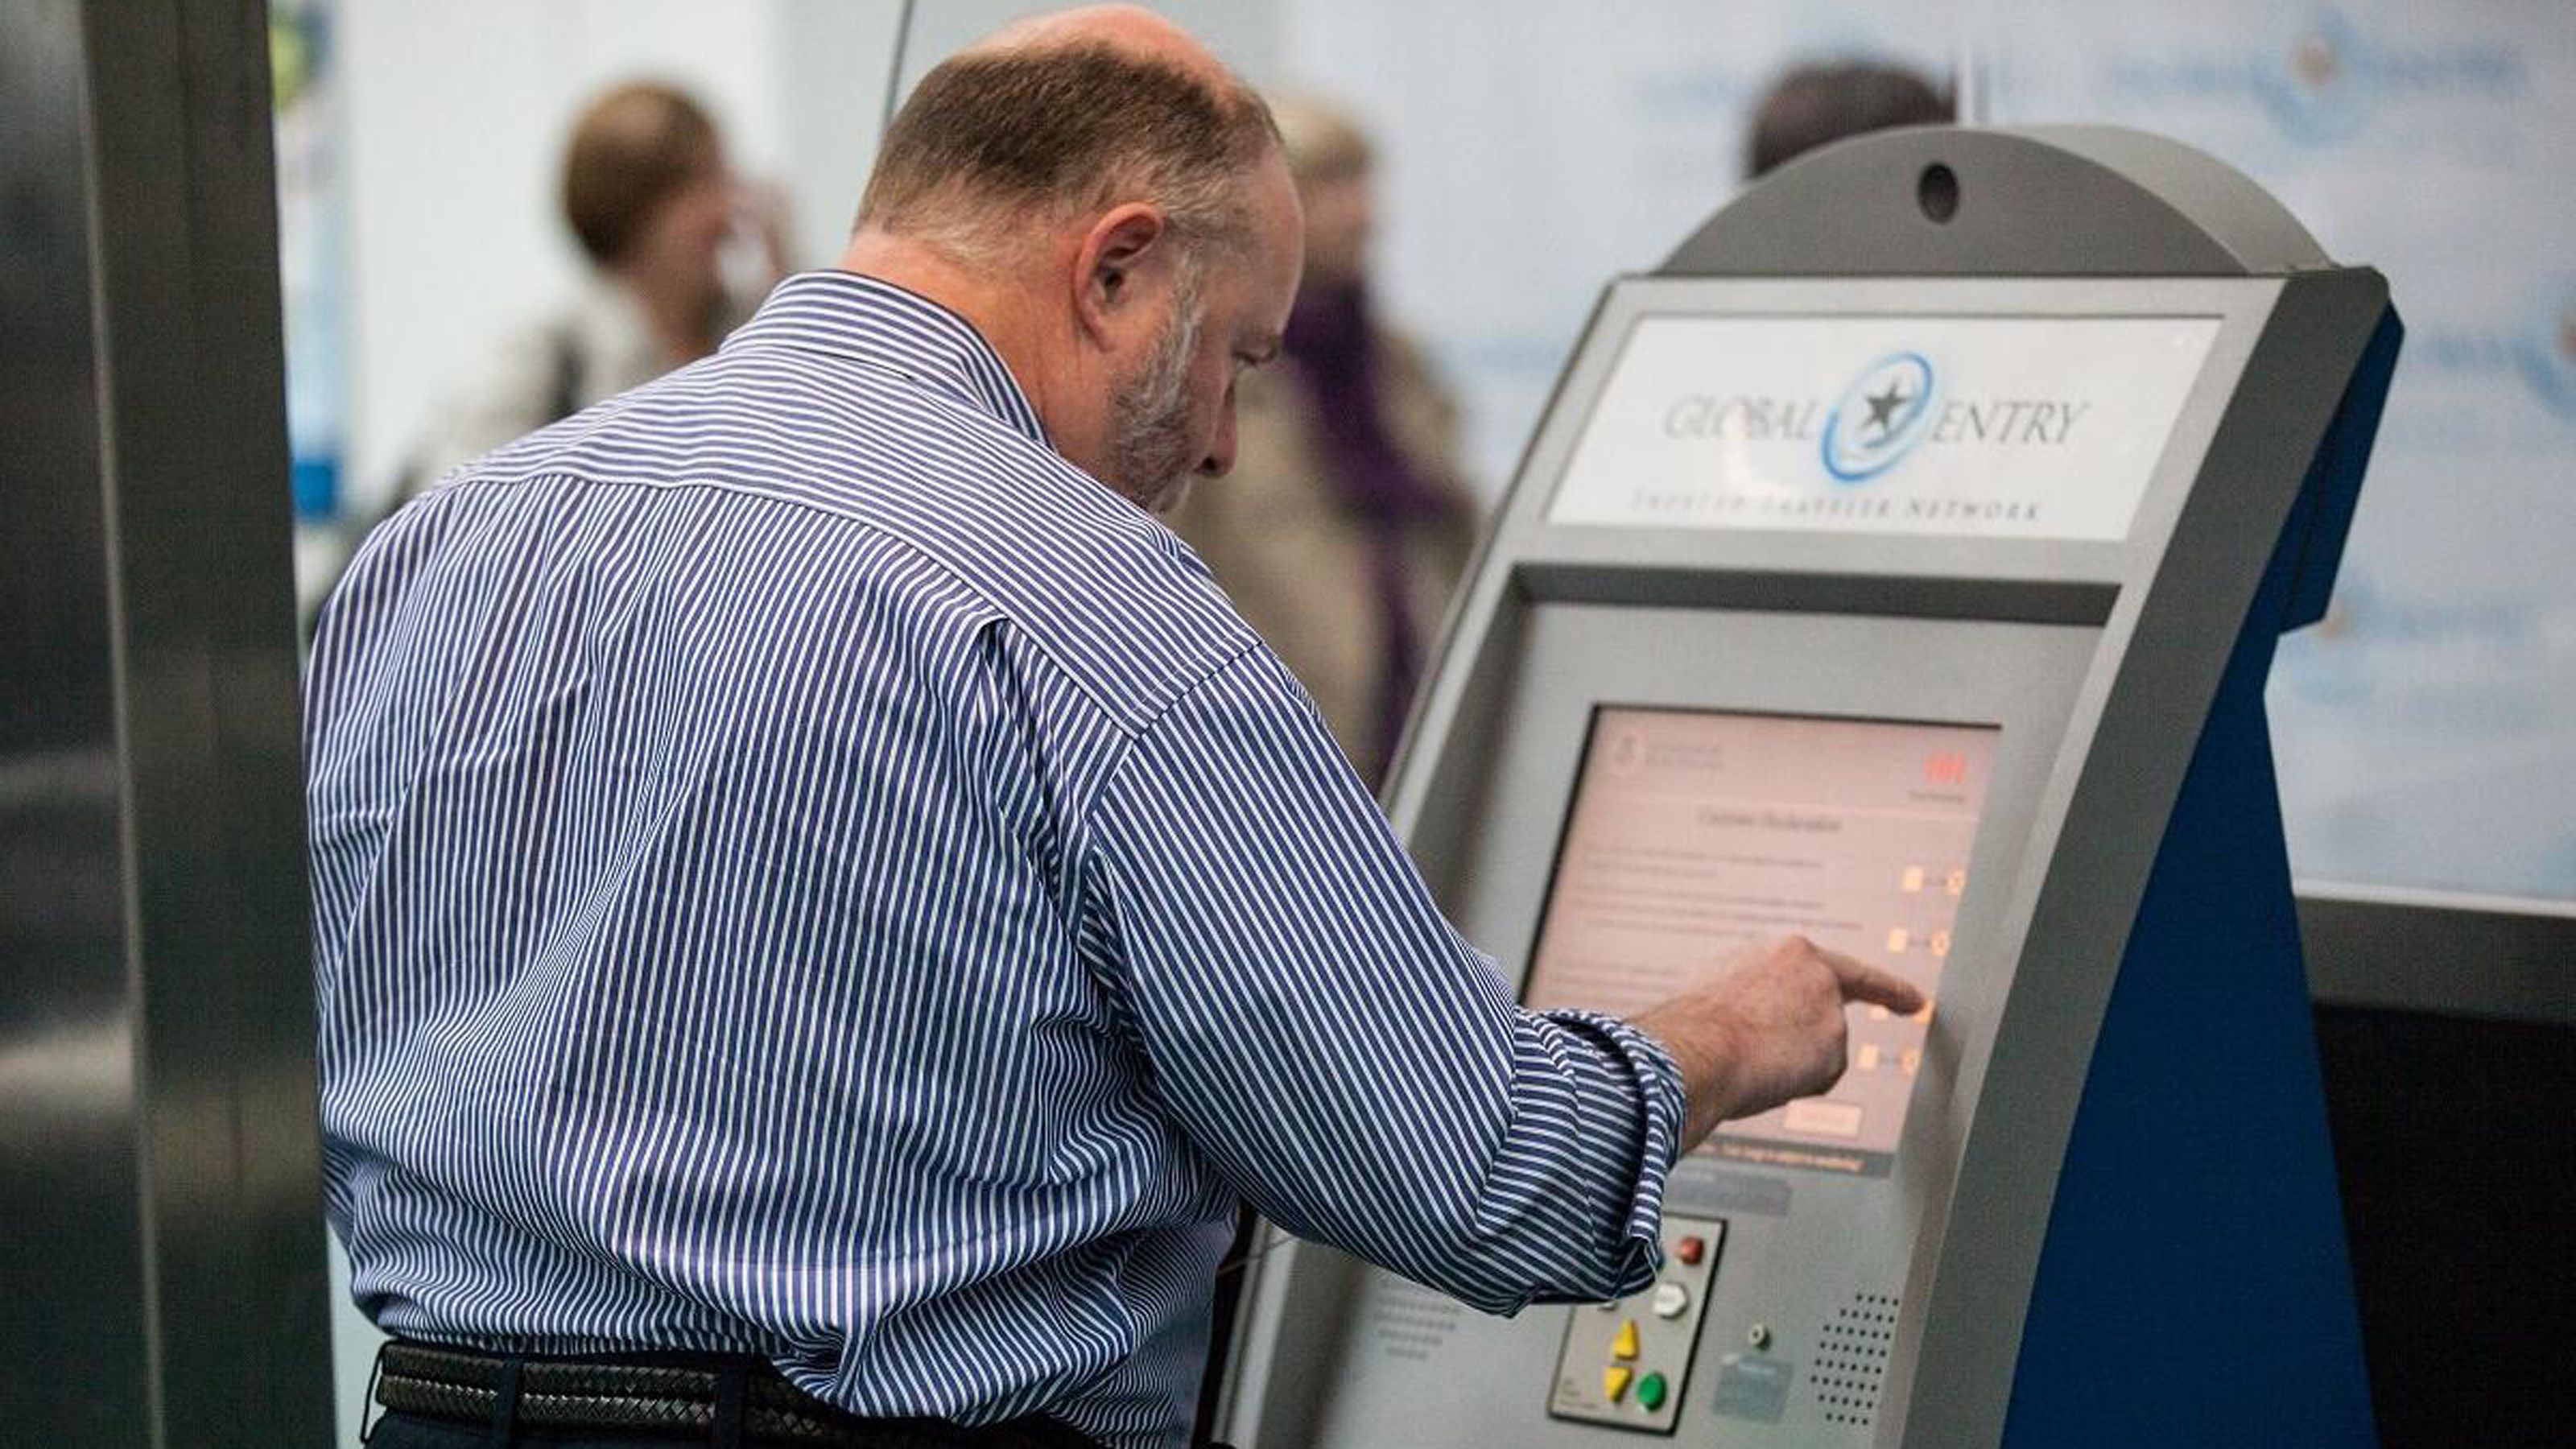 Global Entry Interview Guide — What You Need to Know